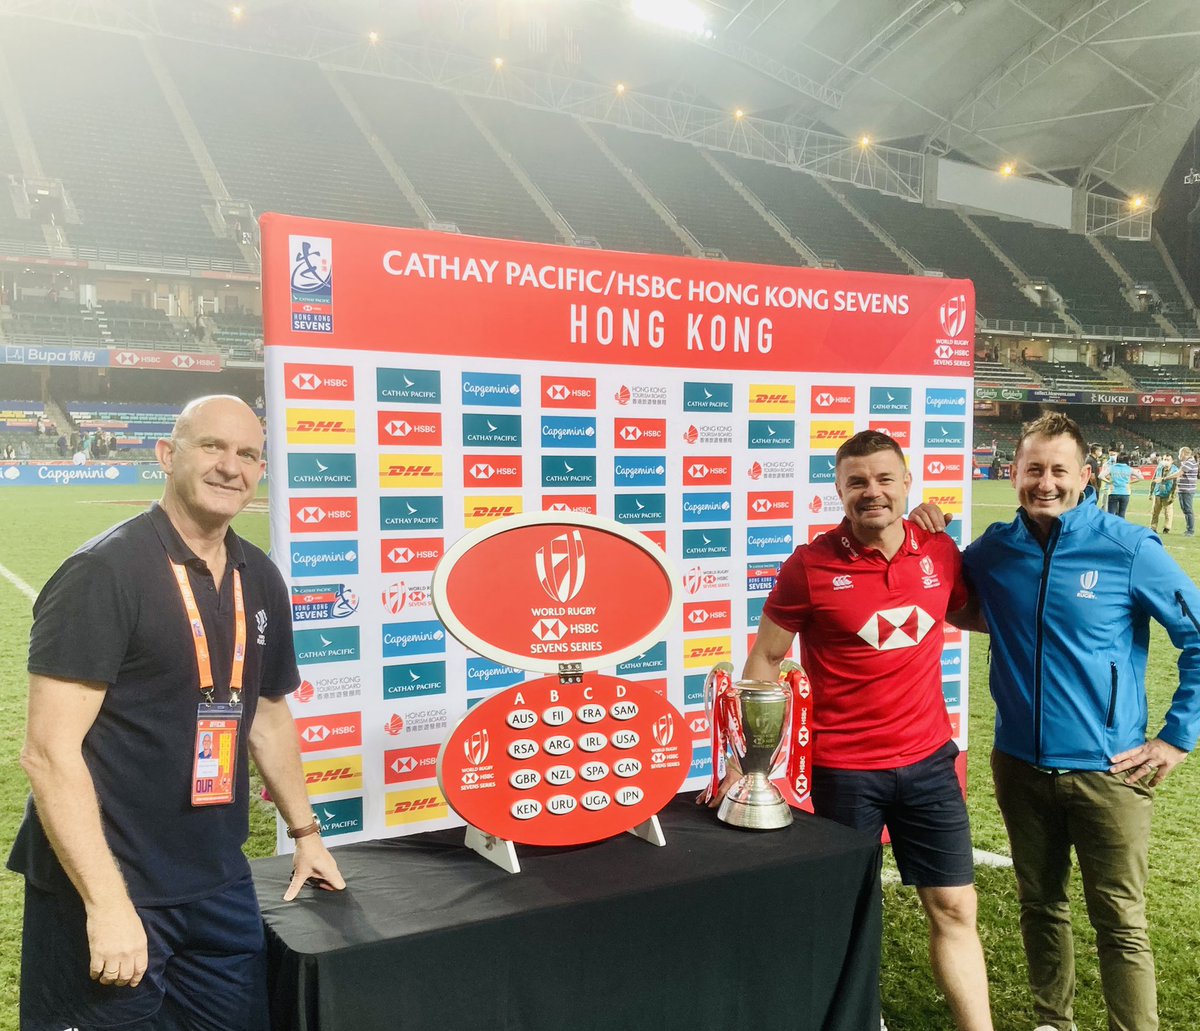 Big thanks to the #HK7s volunteers, fans & staff for the great experience & return of the #HSBC @WorldRugby7s #OURHK7s. Great job also by @Dallen_Stanford @BrianODriscoll with the @Dubai7s pool draw/allocation. #Olympics #Paris2024